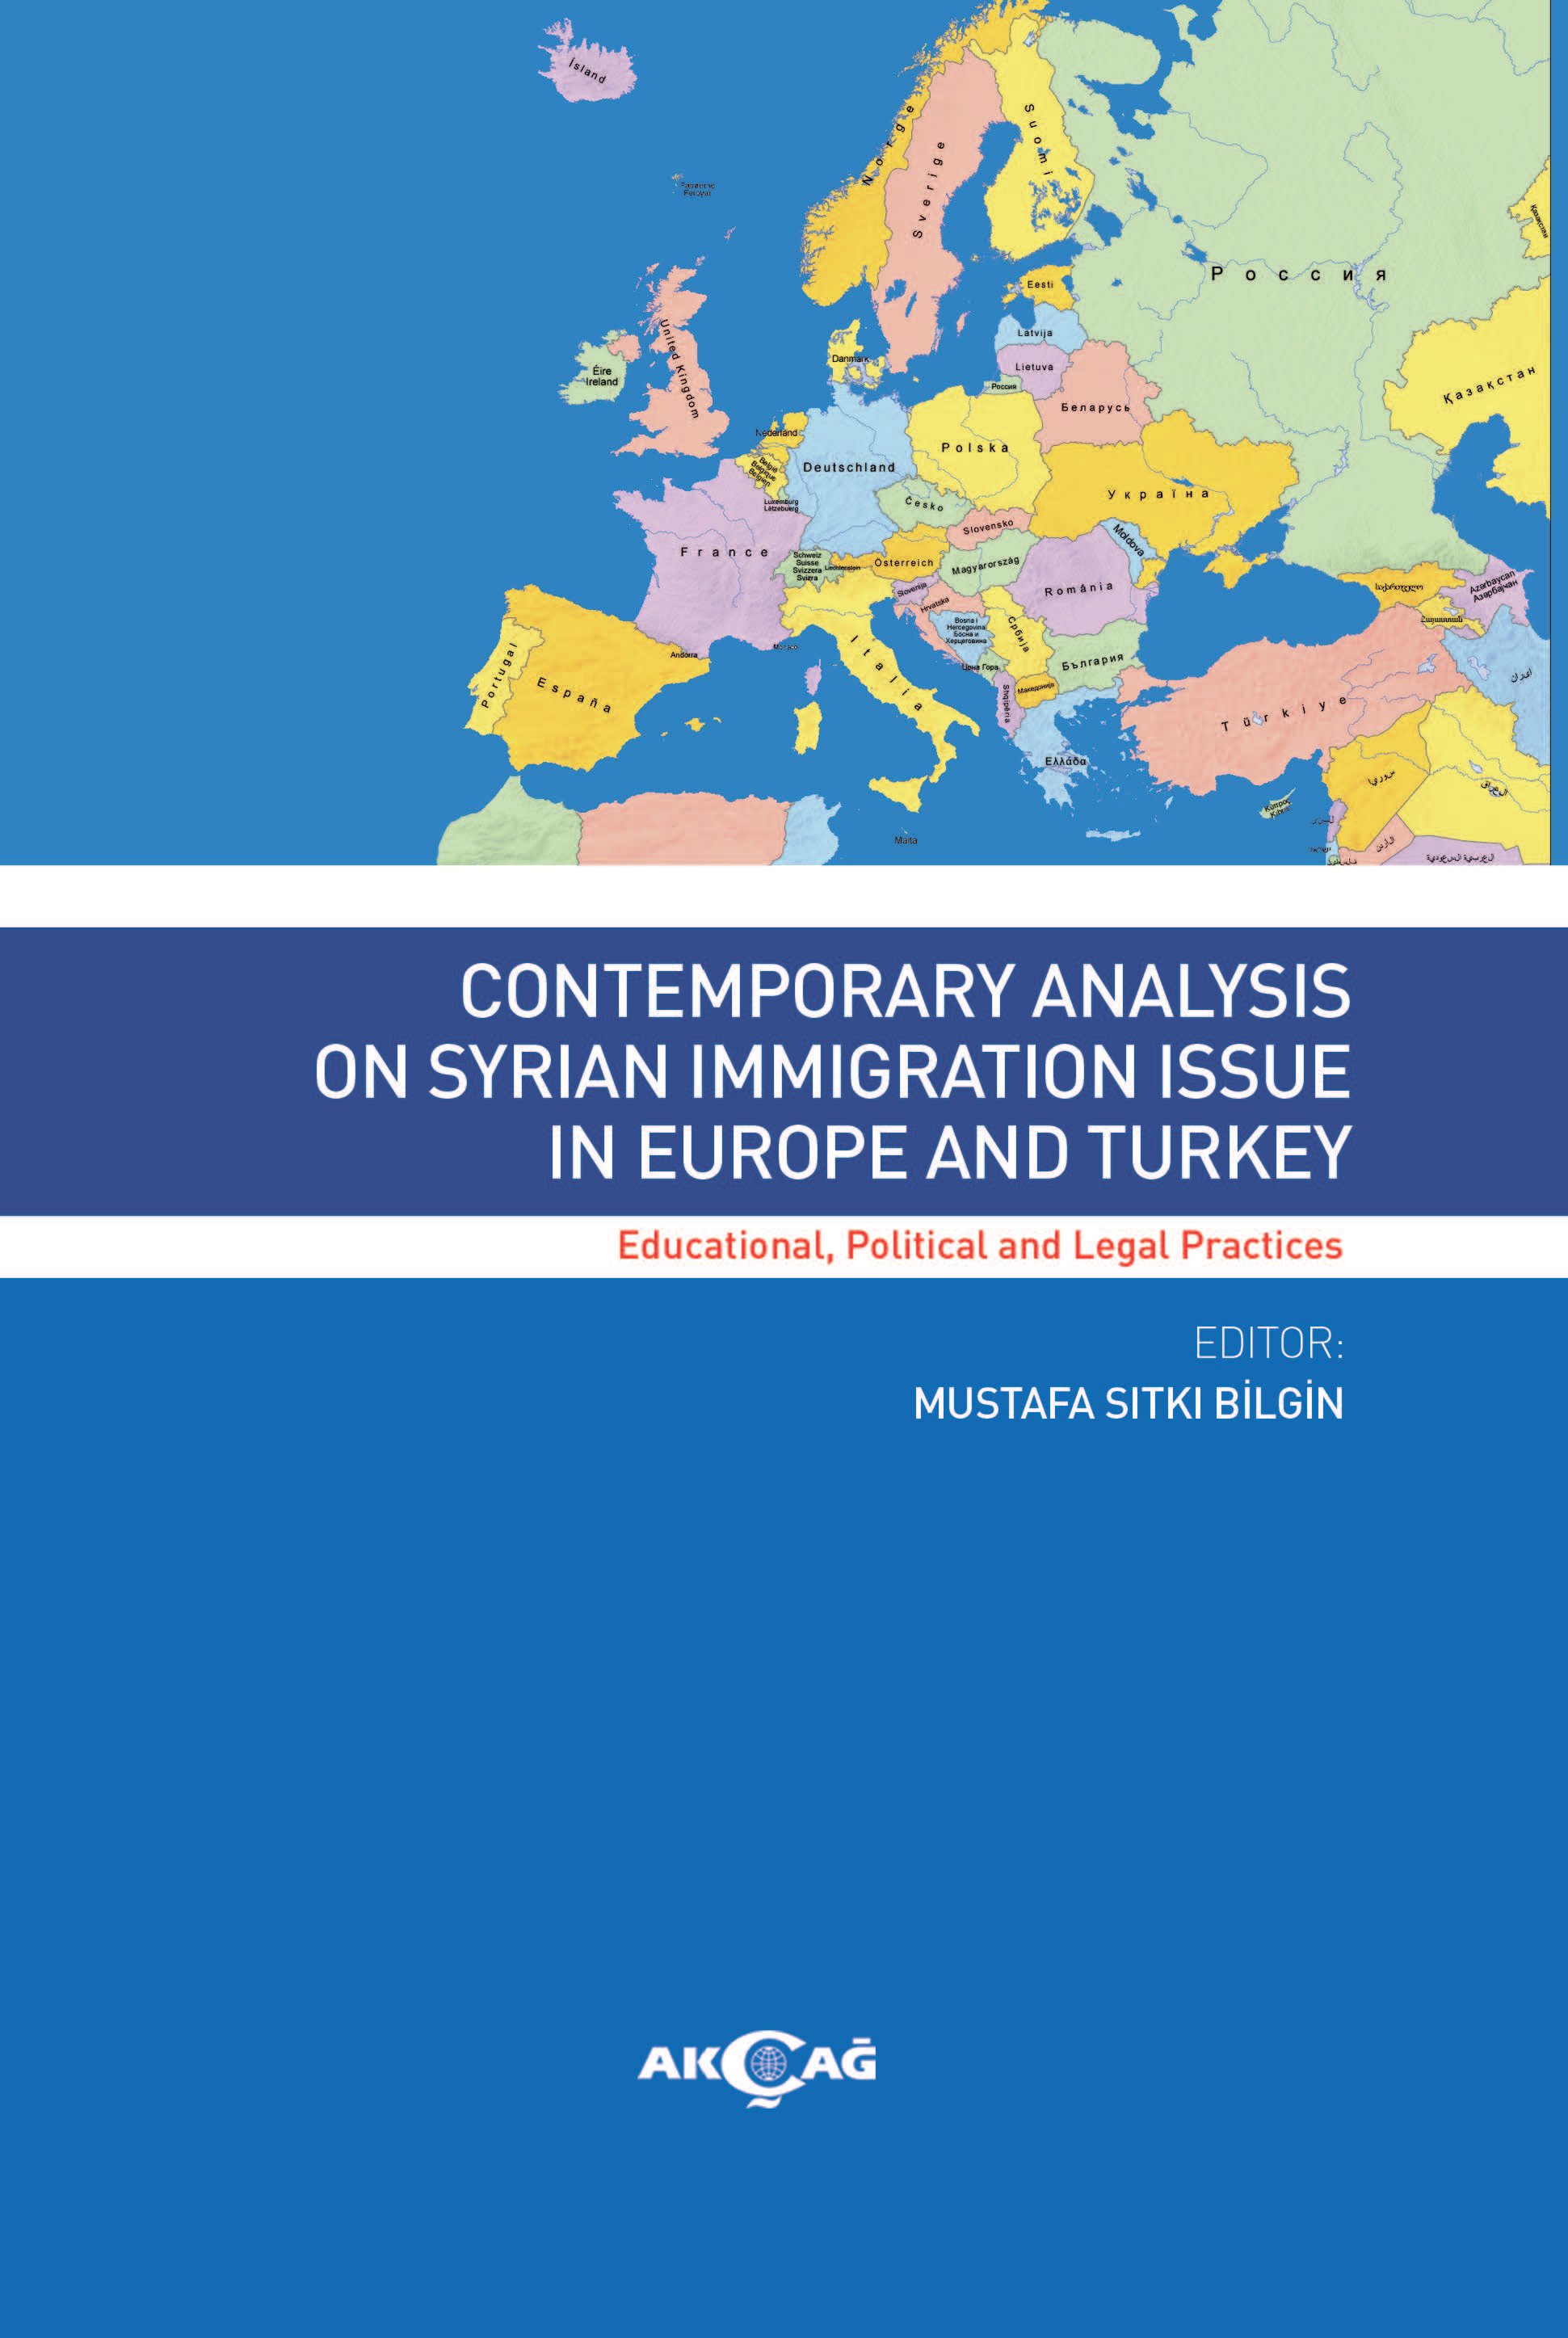 CONTEMPORARY ANALYSIS ON SYRIAN IMMIGRATION ISSUE IN EUROPE AND TURKEY